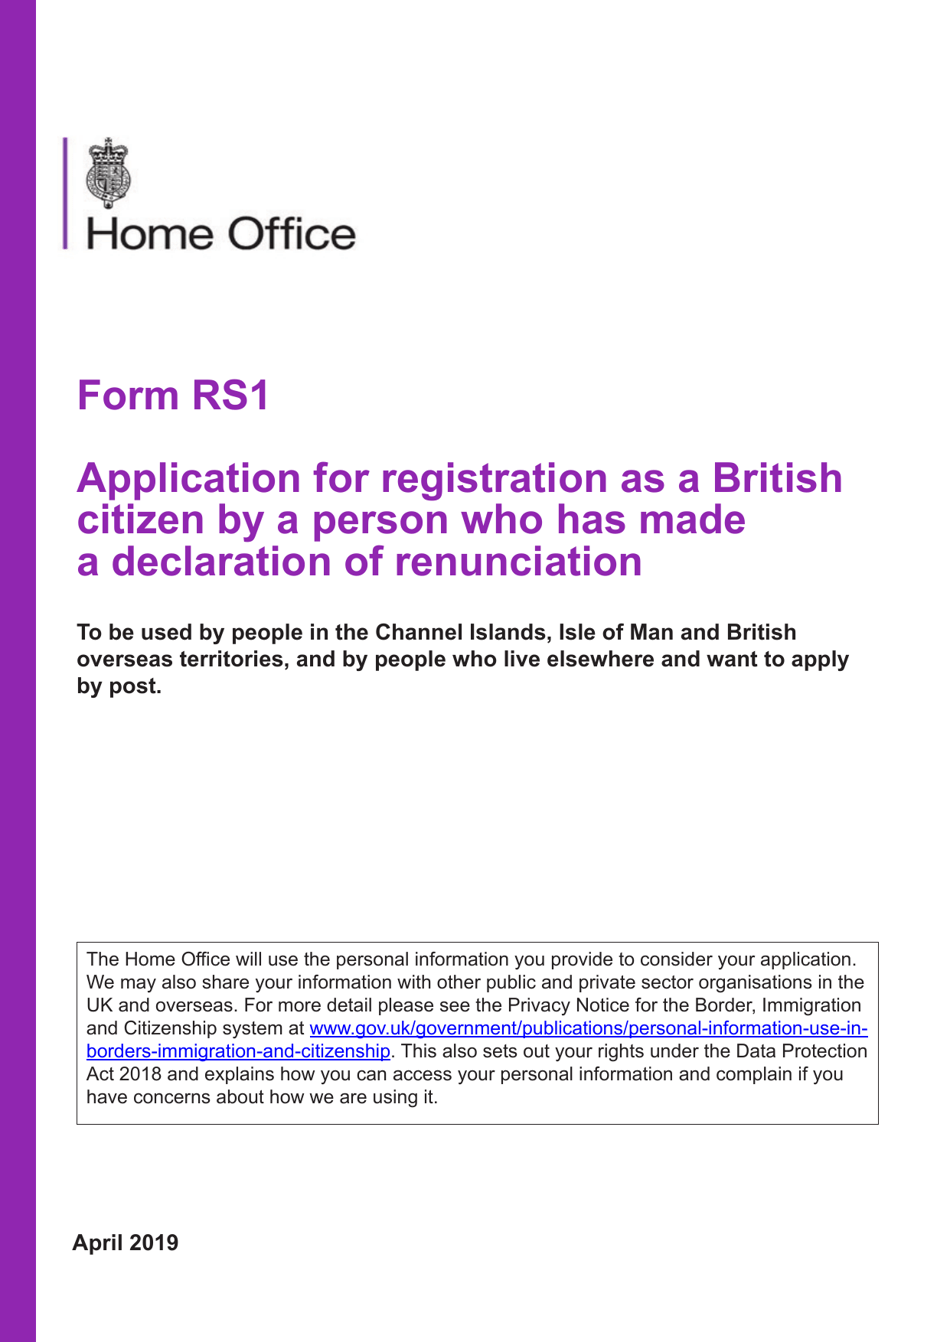 Form RS1 Application for Registration as a British Citizen by a Person Who Has Made a Declaration of Renunciation - United Kingdom, Page 1